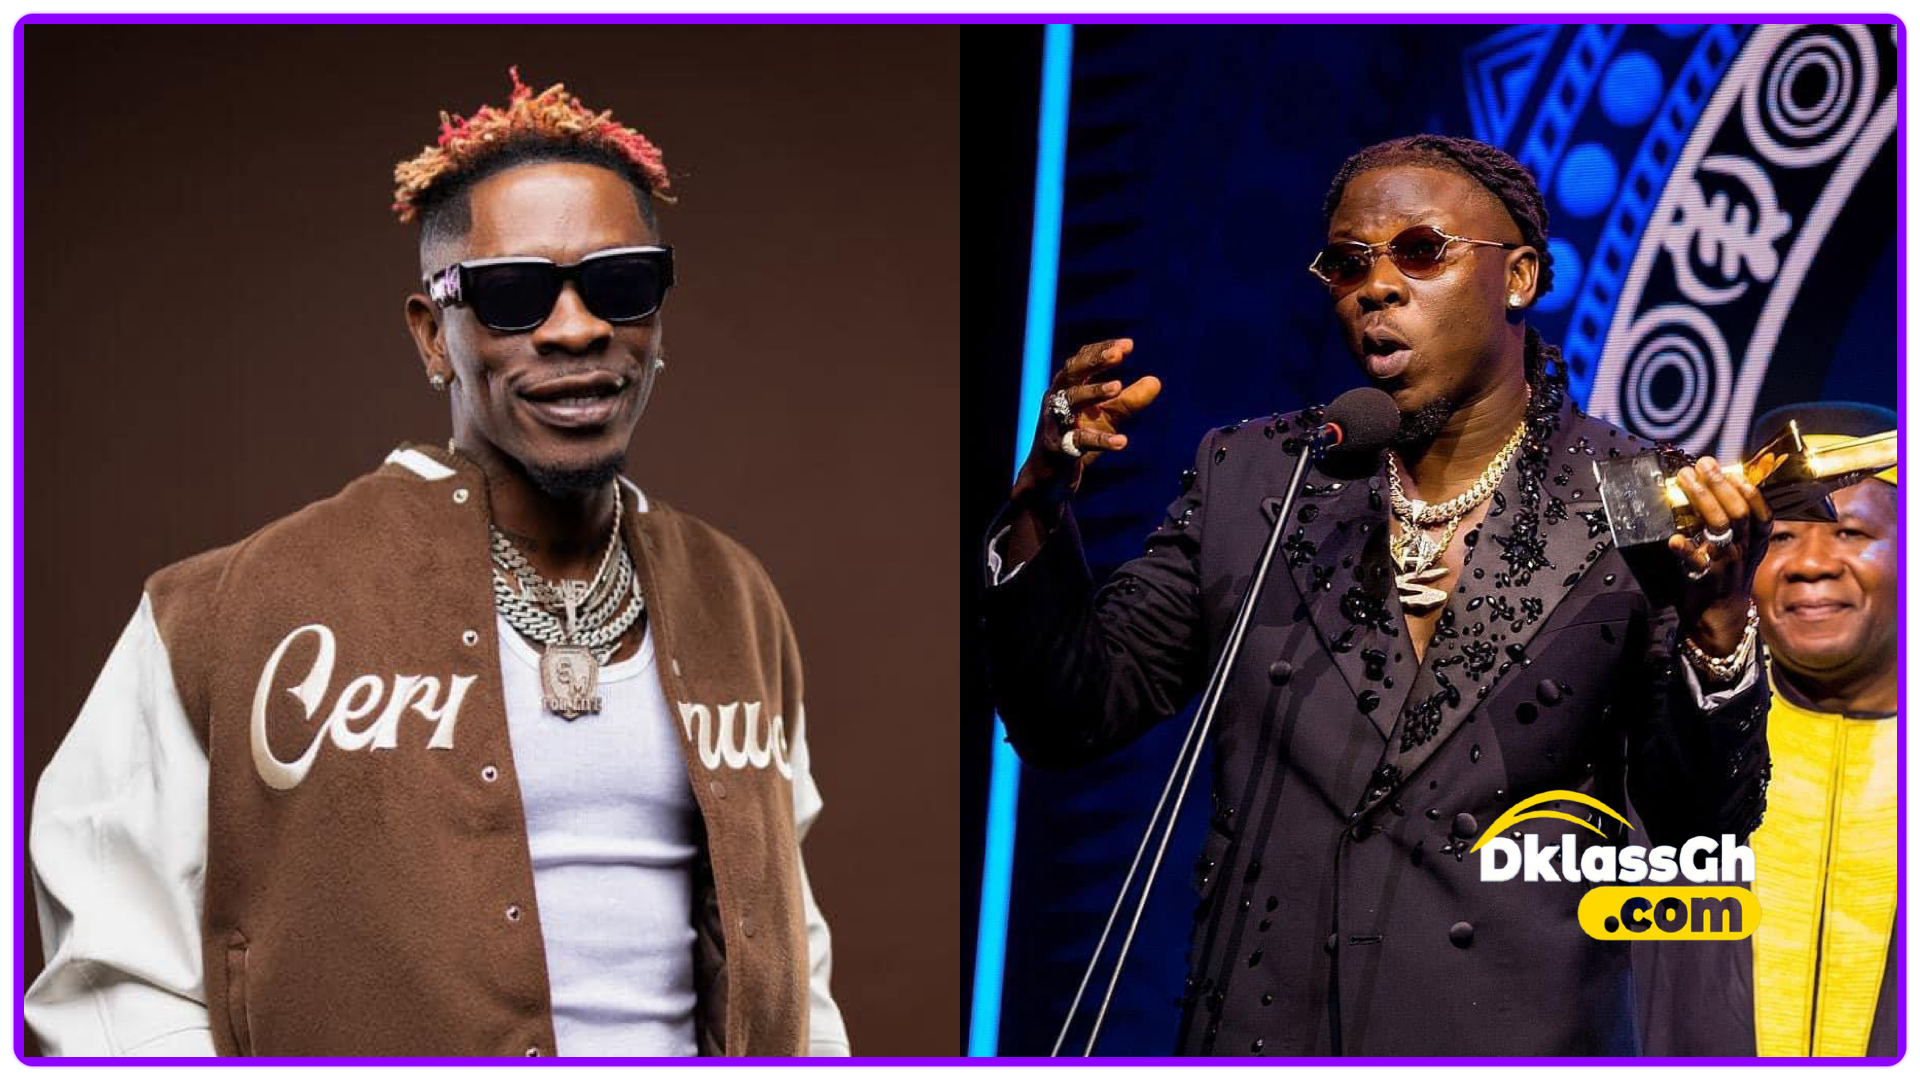 ‘I had nothing to do with it’ – Stonebwoy reacts to cancellation of Wale’s performance at UG